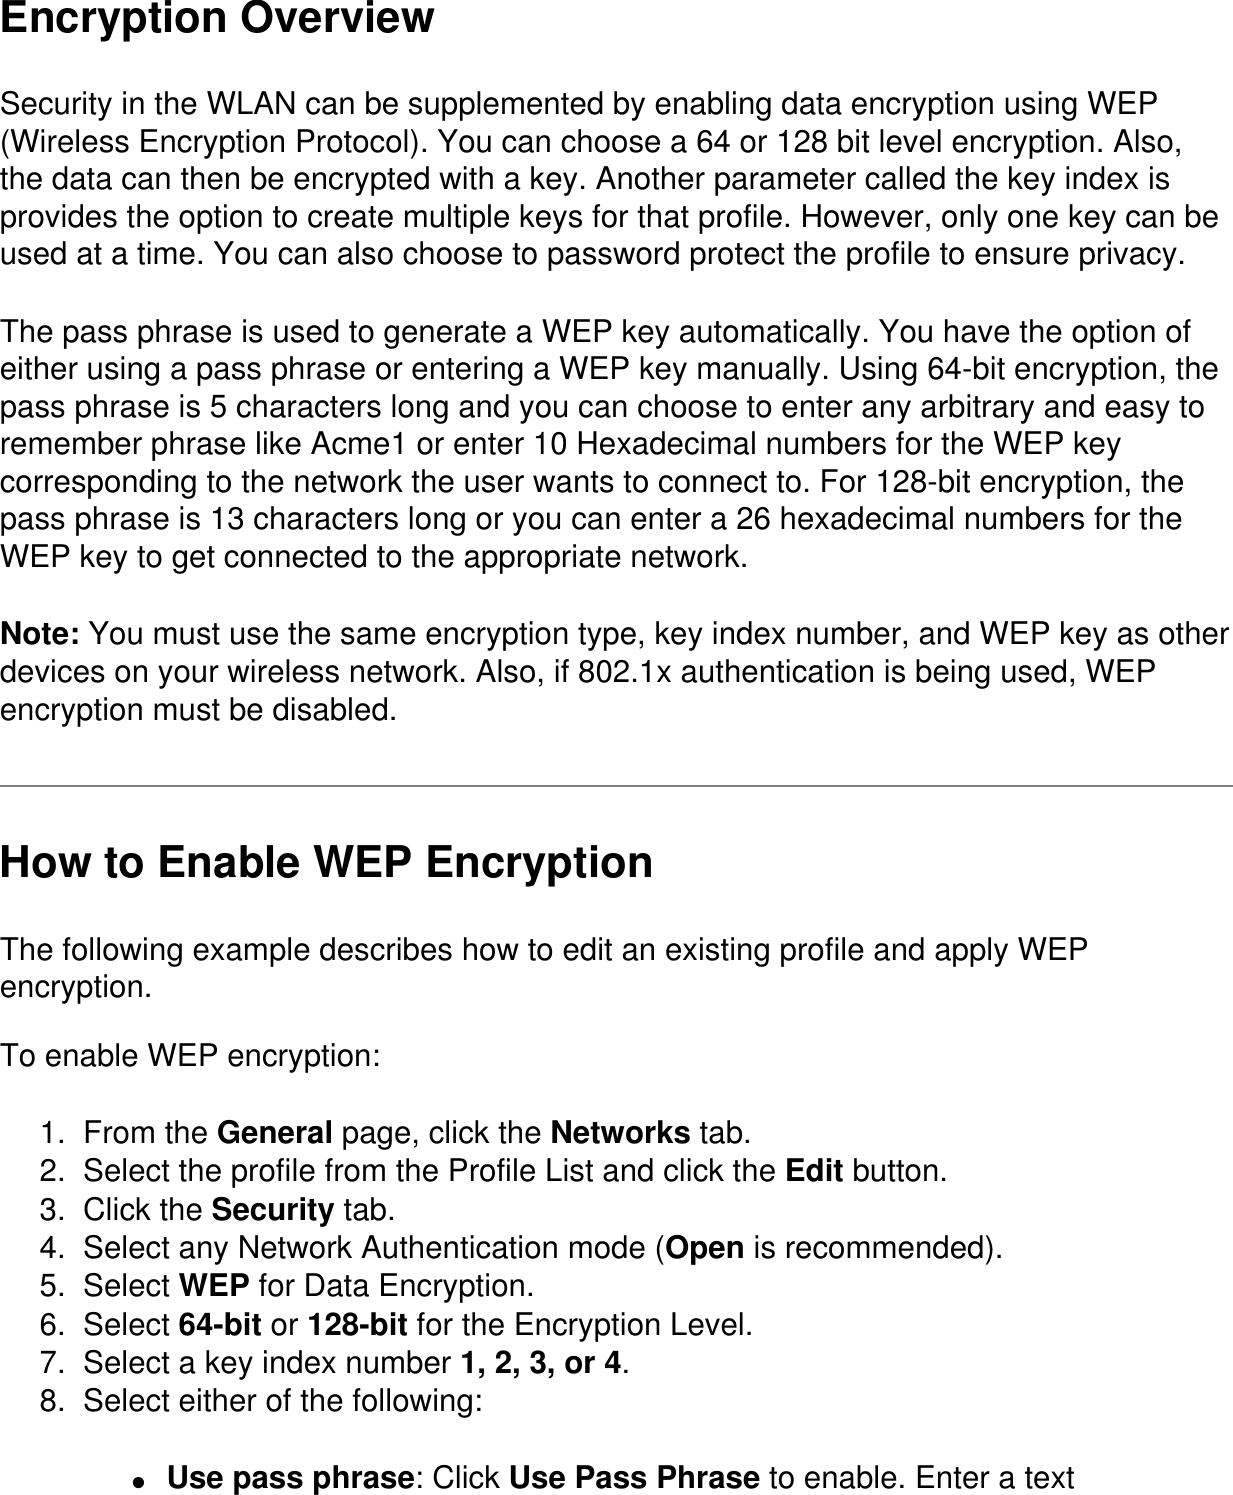 Encryption OverviewSecurity in the WLAN can be supplemented by enabling data encryption using WEP (Wireless Encryption Protocol). You can choose a 64 or 128 bit level encryption. Also, the data can then be encrypted with a key. Another parameter called the key index is provides the option to create multiple keys for that profile. However, only one key can be used at a time. You can also choose to password protect the profile to ensure privacy.The pass phrase is used to generate a WEP key automatically. You have the option of either using a pass phrase or entering a WEP key manually. Using 64-bit encryption, the pass phrase is 5 characters long and you can choose to enter any arbitrary and easy to remember phrase like Acme1 or enter 10 Hexadecimal numbers for the WEP key corresponding to the network the user wants to connect to. For 128-bit encryption, the pass phrase is 13 characters long or you can enter a 26 hexadecimal numbers for the WEP key to get connected to the appropriate network.Note: You must use the same encryption type, key index number, and WEP key as other devices on your wireless network. Also, if 802.1x authentication is being used, WEP encryption must be disabled. How to Enable WEP EncryptionThe following example describes how to edit an existing profile and apply WEP encryption.To enable WEP encryption:1.  From the General page, click the Networks tab.2.  Select the profile from the Profile List and click the Edit button.3.  Click the Security tab.4.  Select any Network Authentication mode (Open is recommended).5.  Select WEP for Data Encryption.6.  Select 64-bit or 128-bit for the Encryption Level.7.  Select a key index number 1, 2, 3, or 4. 8.  Select either of the following:●     Use pass phrase: Click Use Pass Phrase to enable. Enter a text 